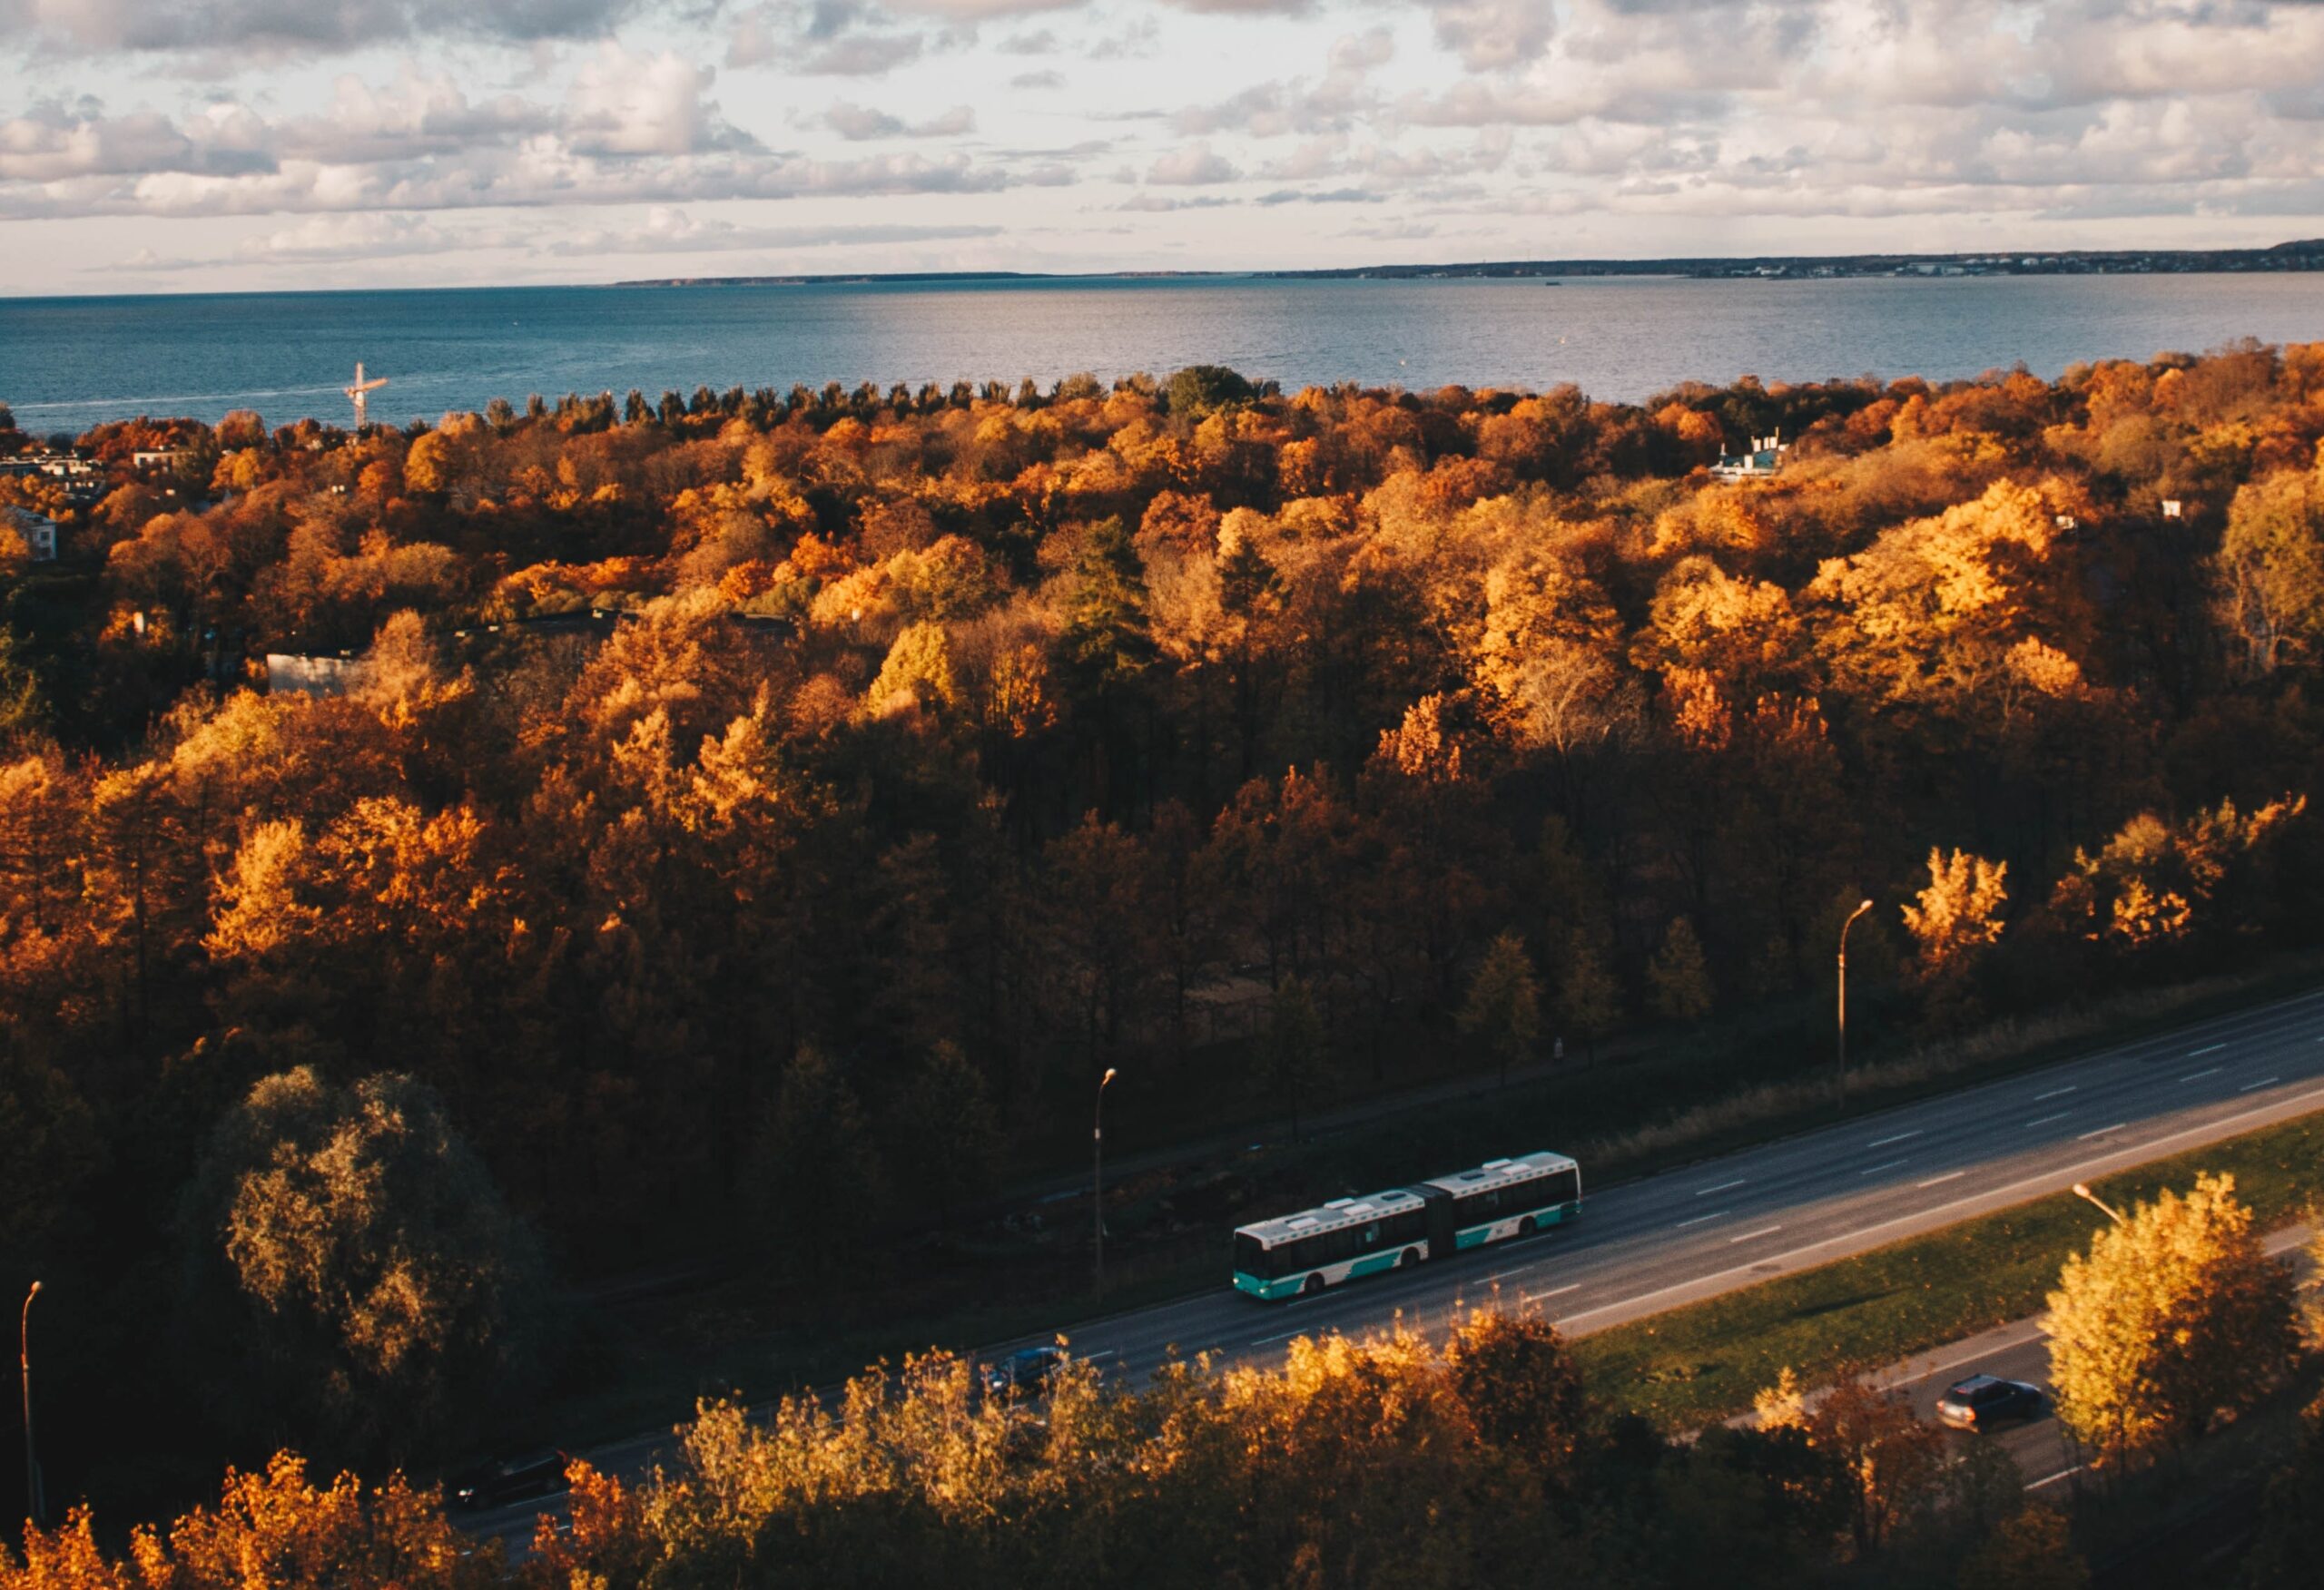 Charter bus driving on highway surrounded by autumn scenery